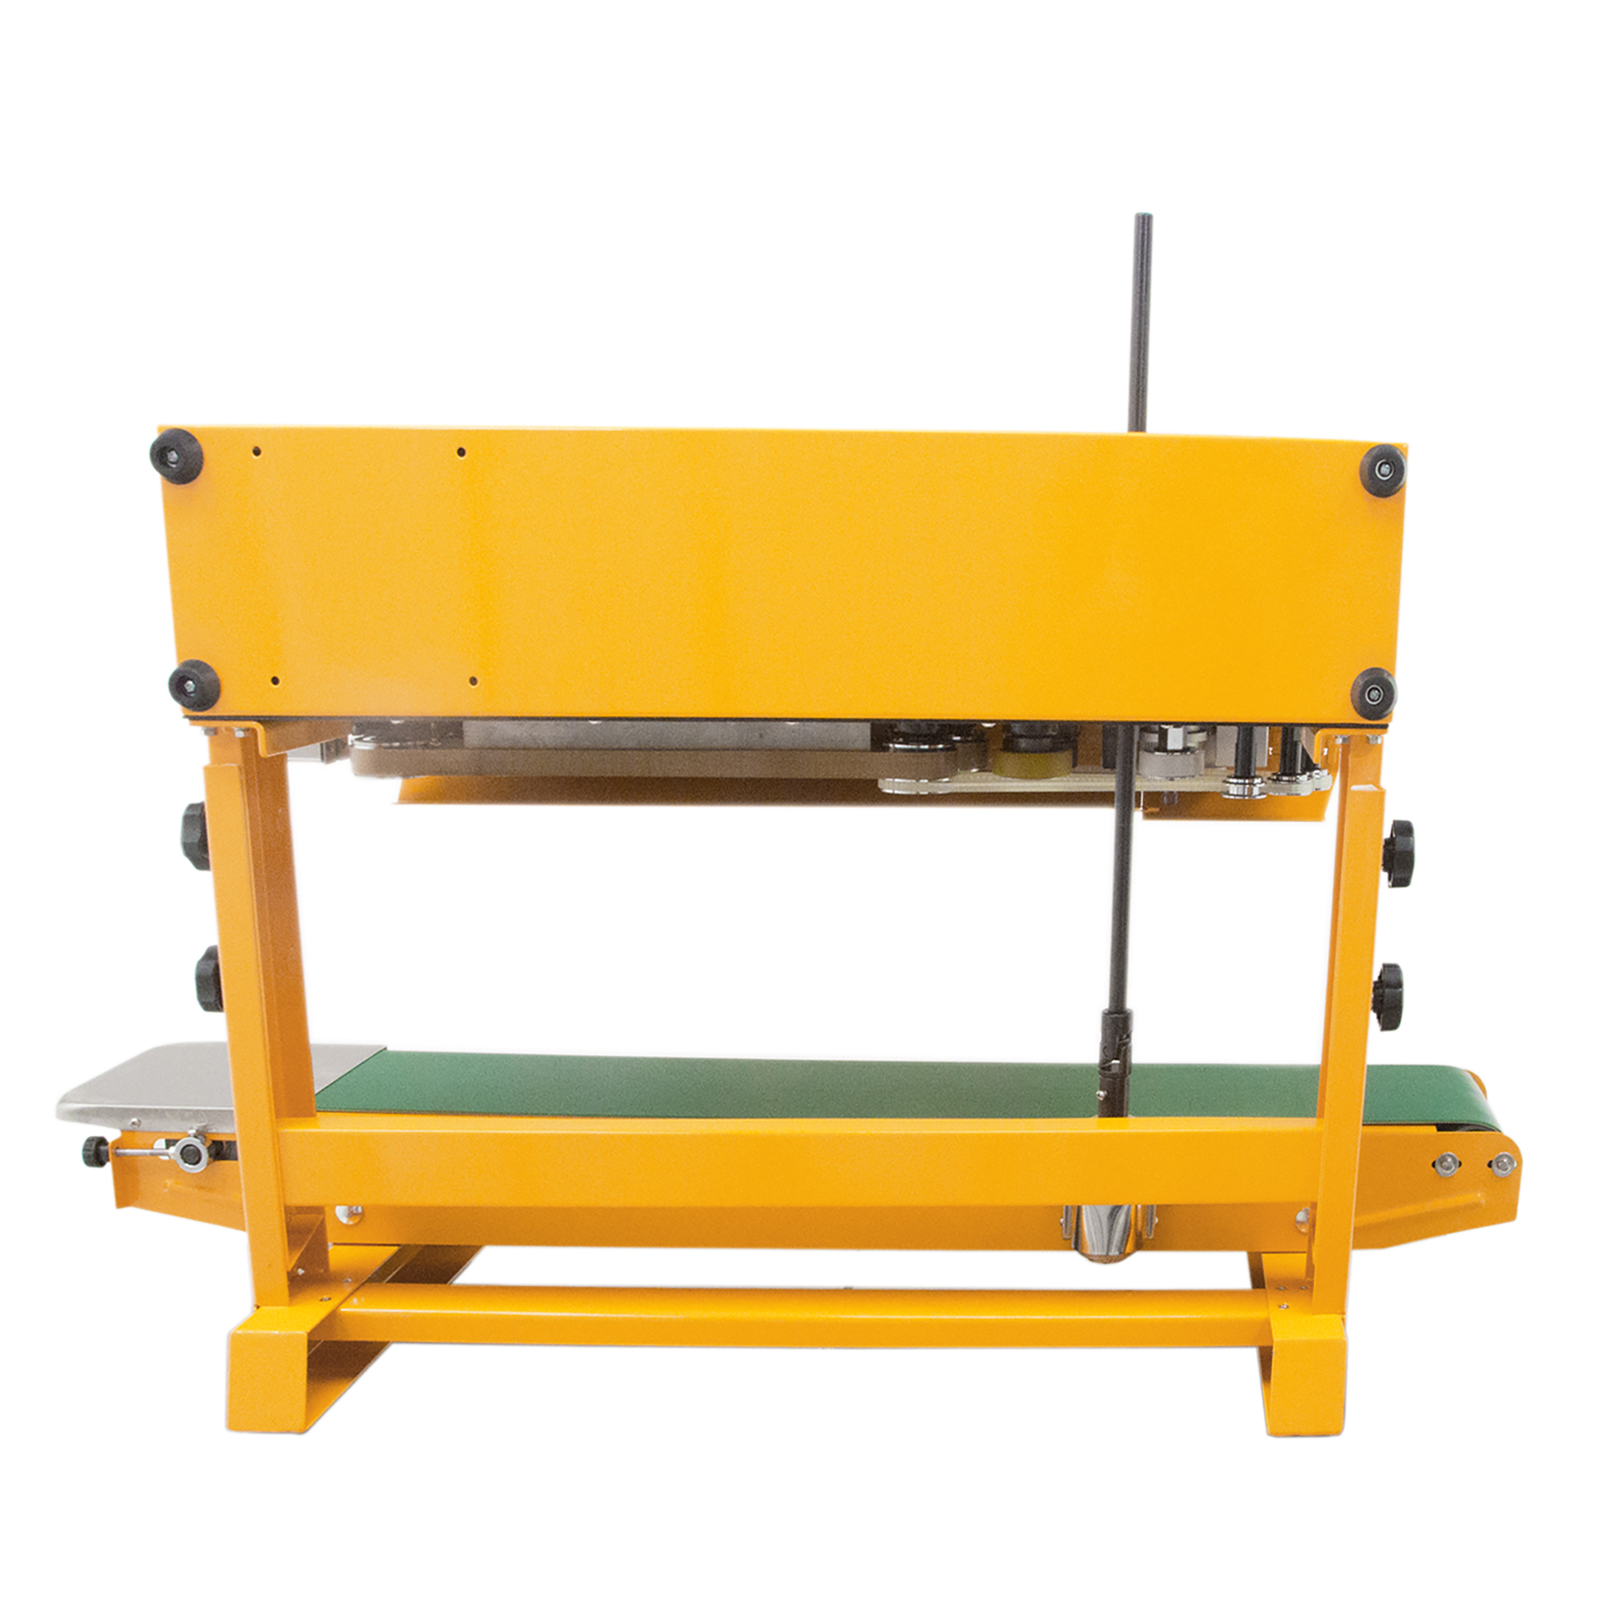 back view of a yellow continuous band sealer.